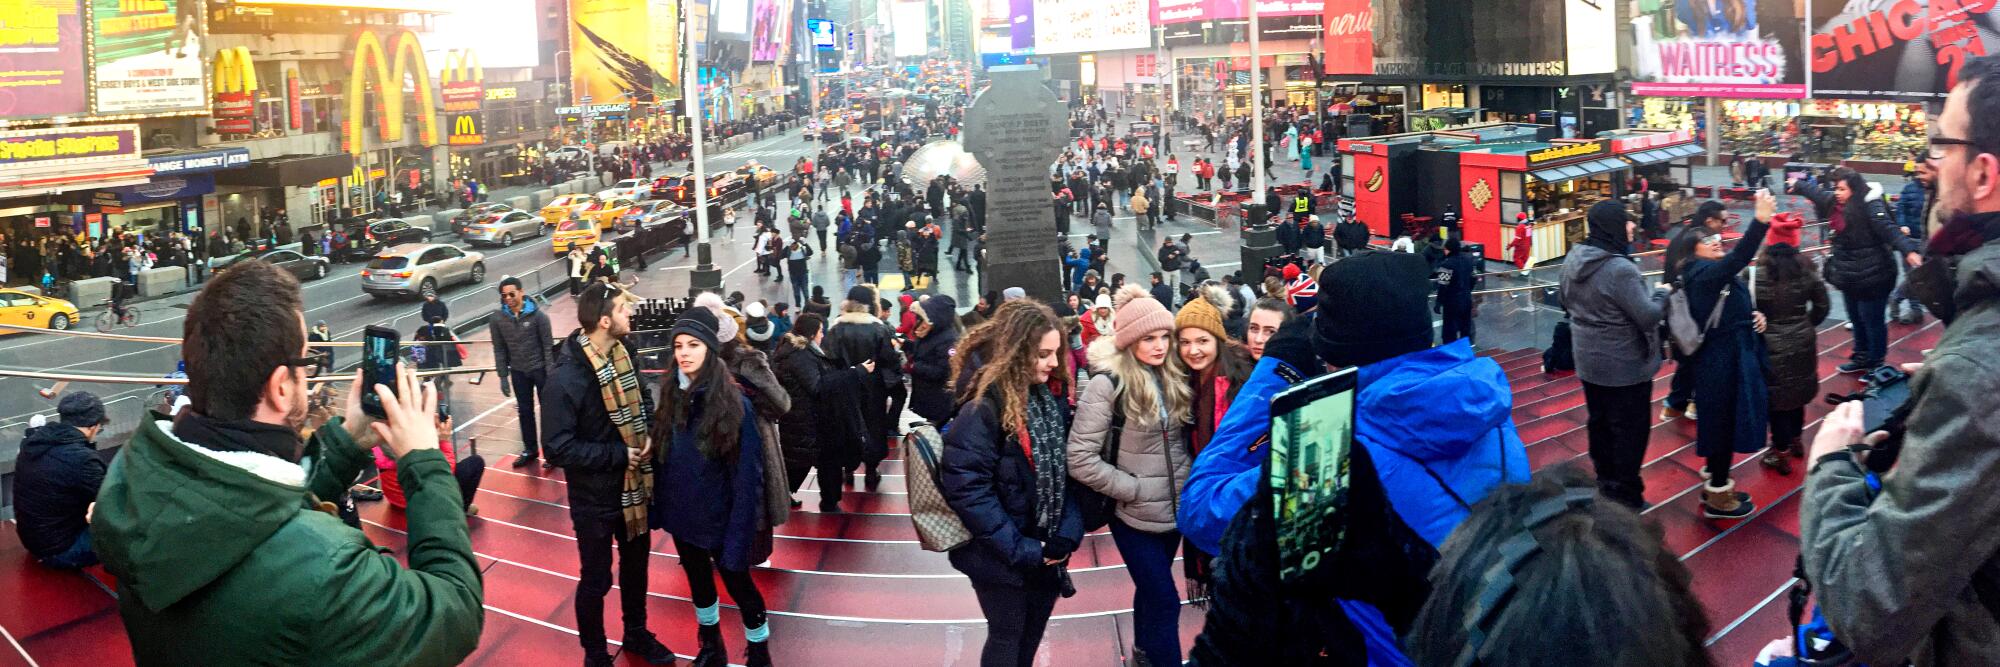 Crowds jostle under bright signs along Broadway. Times Square, New York. 